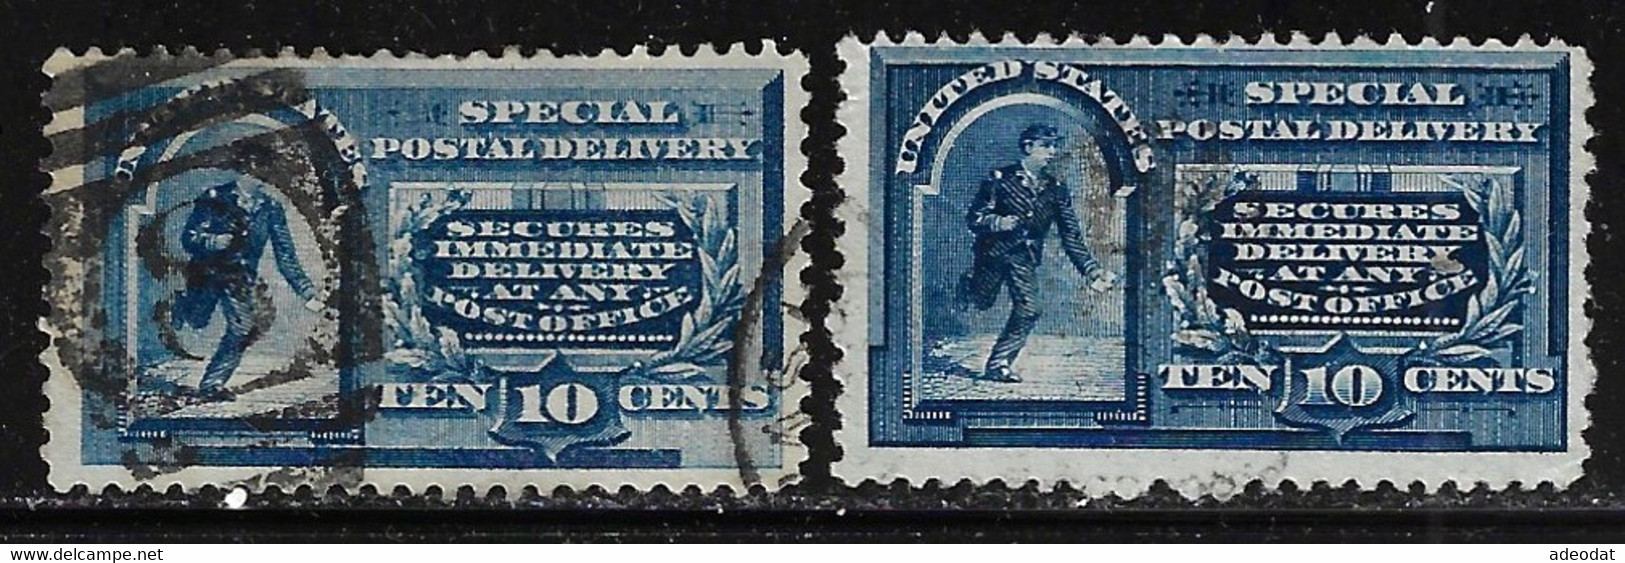 UNITED STATES 1885 SPECIAL DELIVERY SCOTT E1,E4 USED CV US$125. - Special Delivery, Registration & Certified